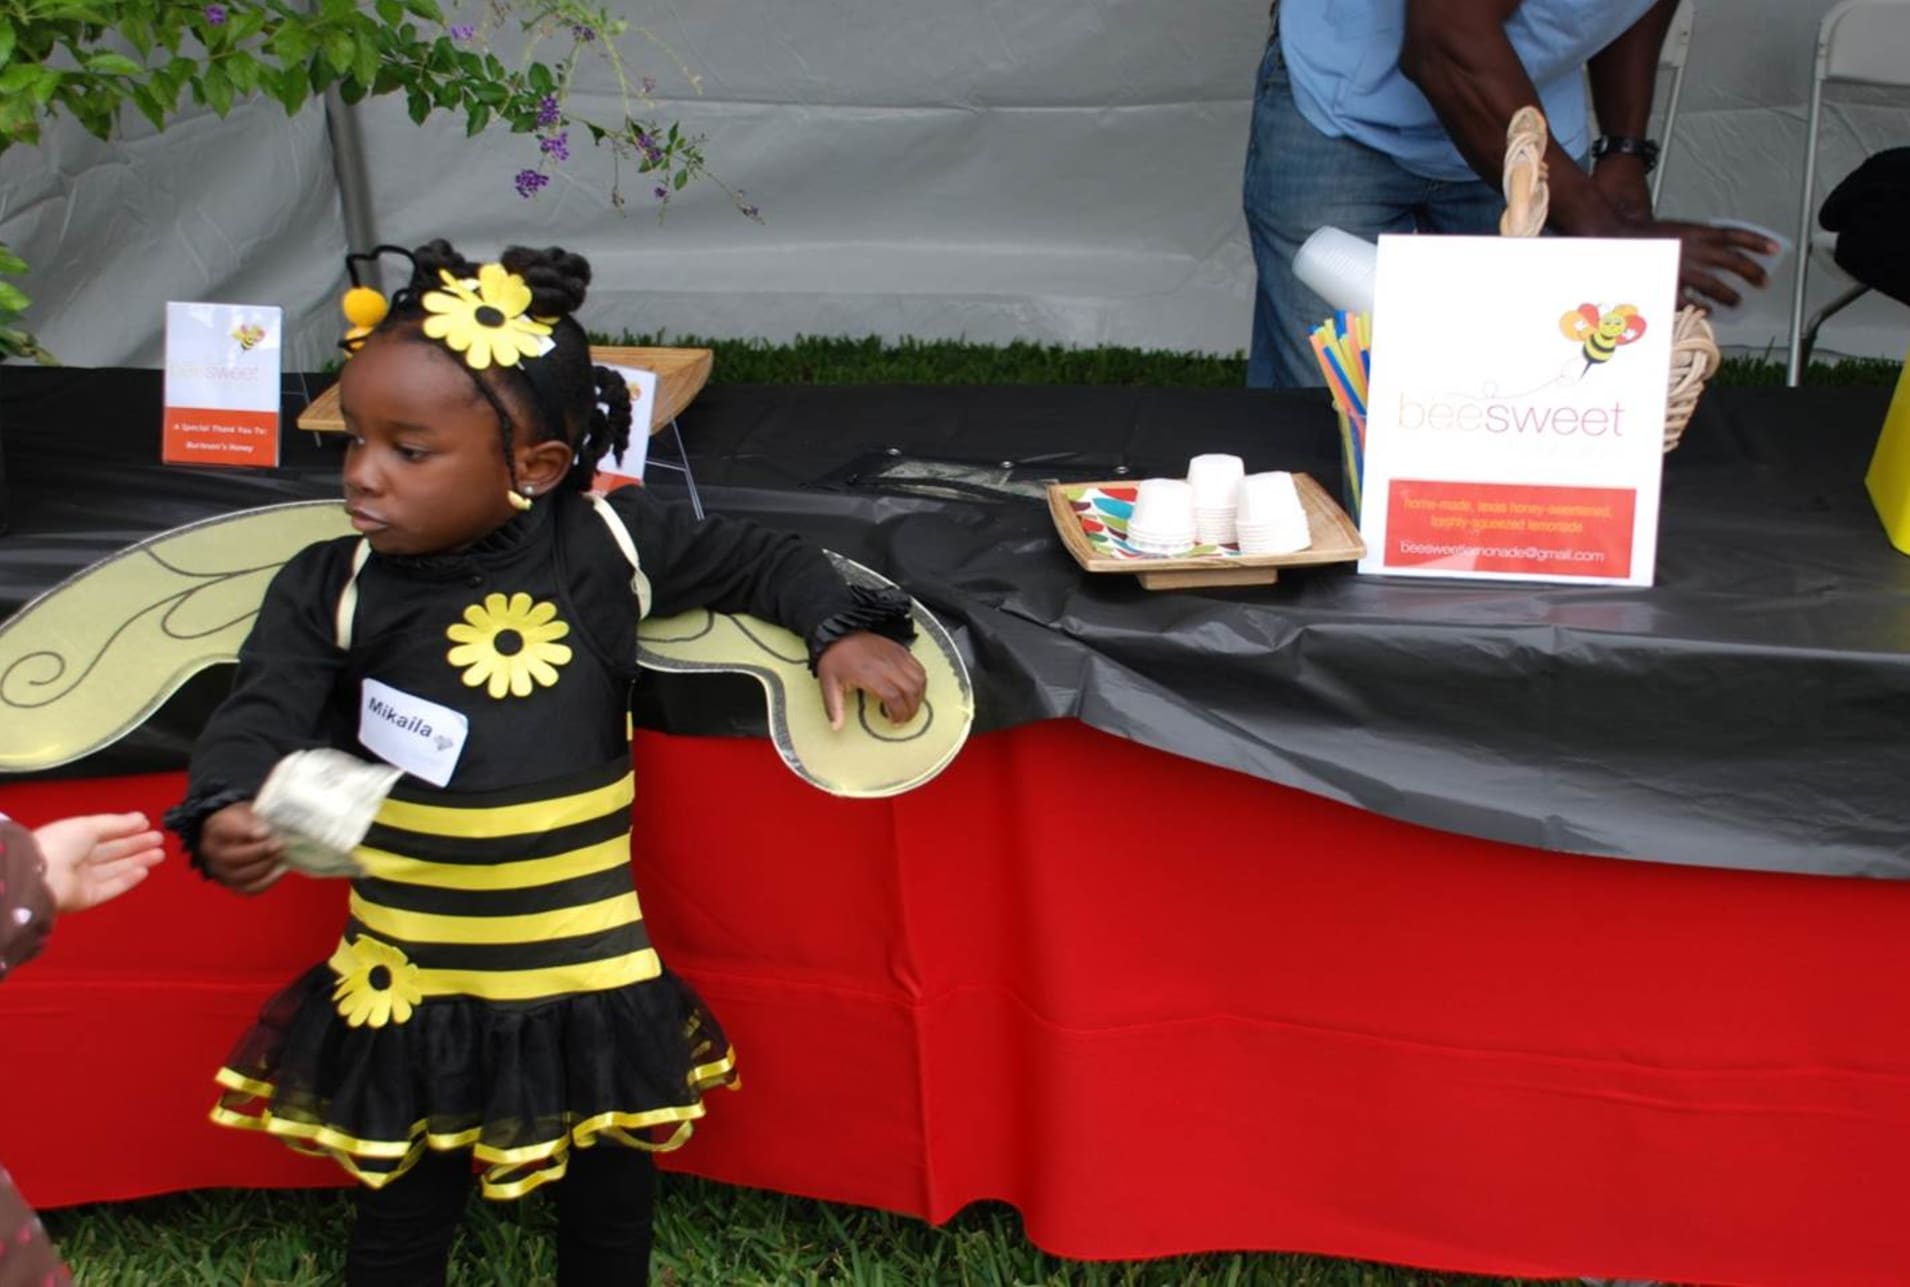 this photo shows how young Mikaila Ulmer was when she founded Me & the Bees Lemonade